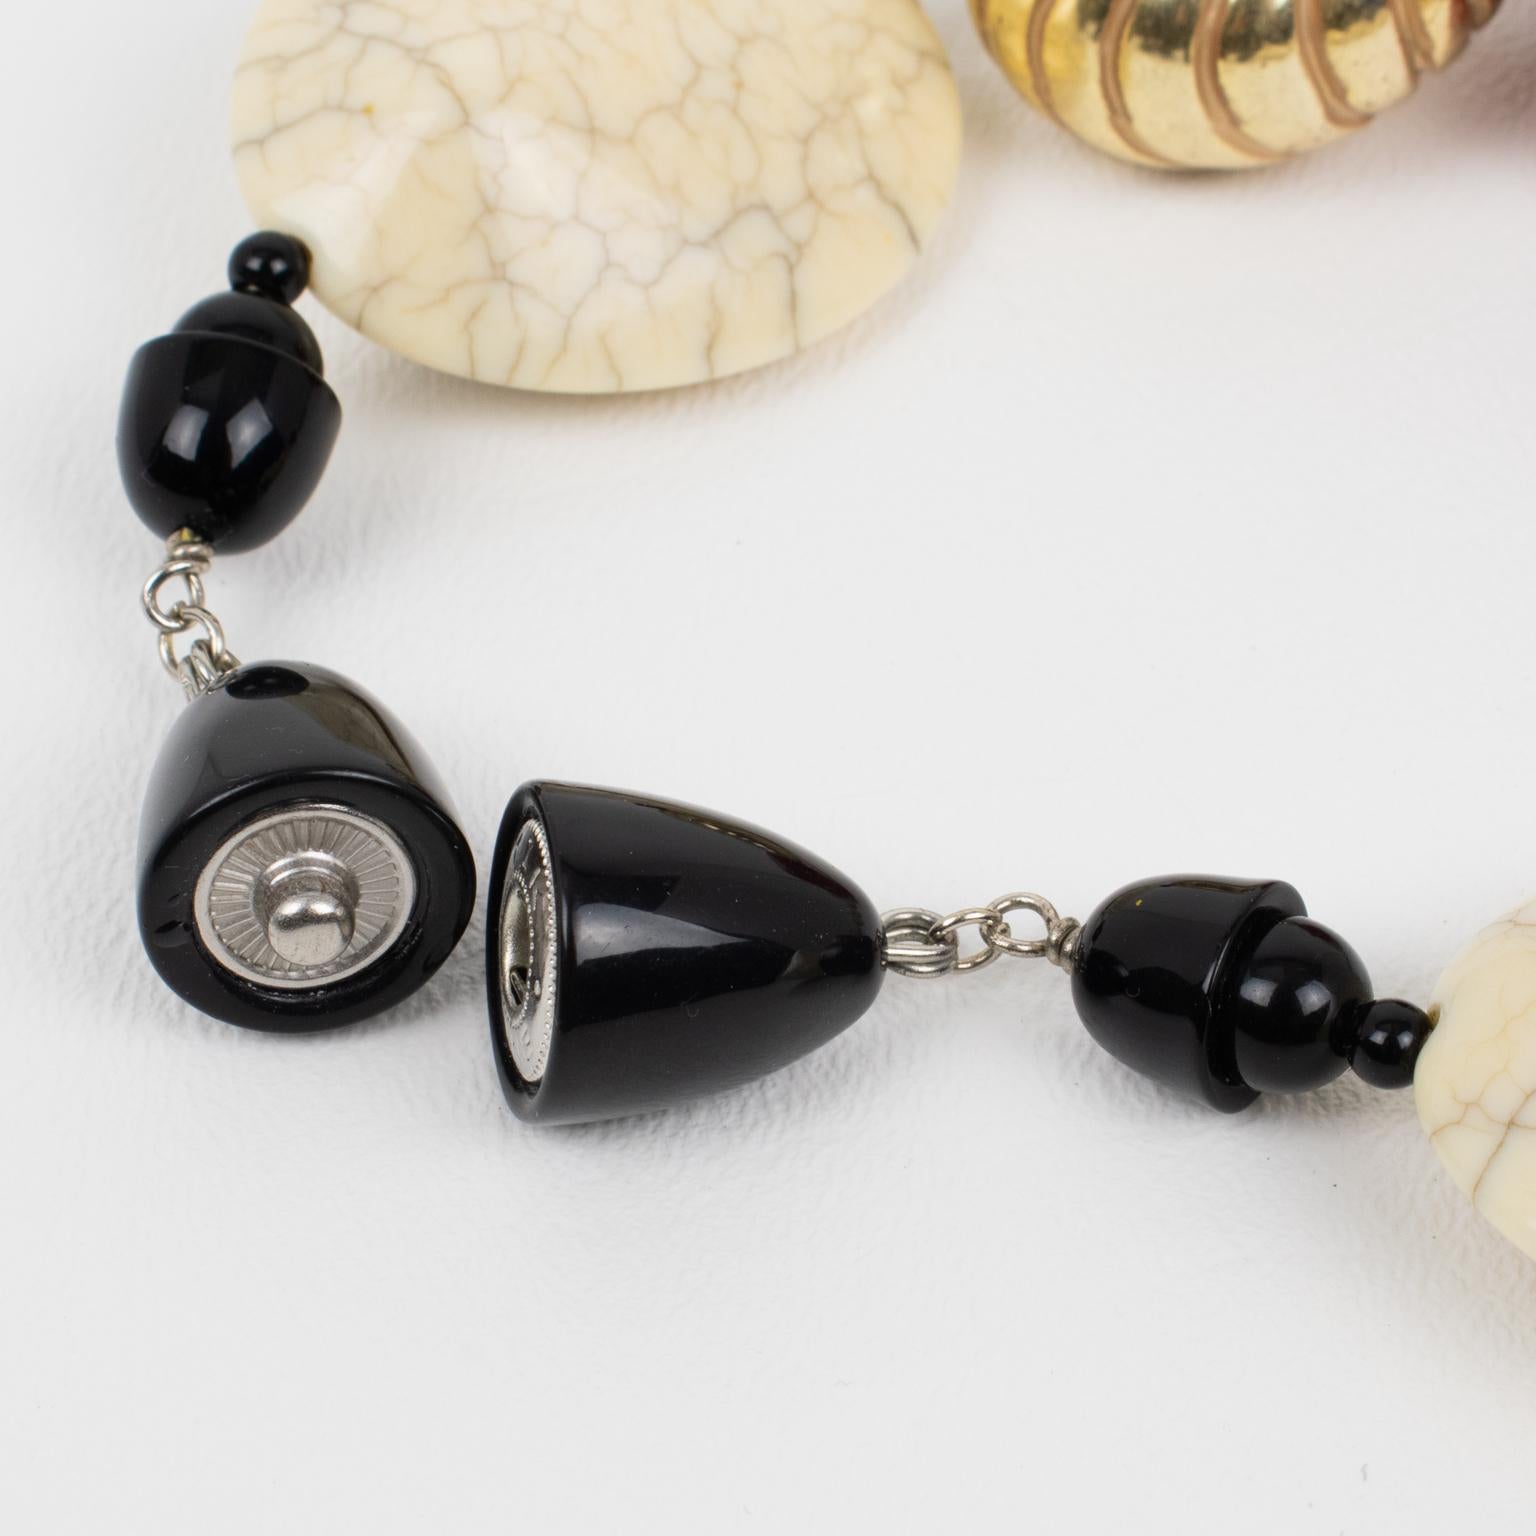 Modern Angela Caputi Japanese Inspired Oversized Resin Necklace with Faux-Ceramic Beads For Sale